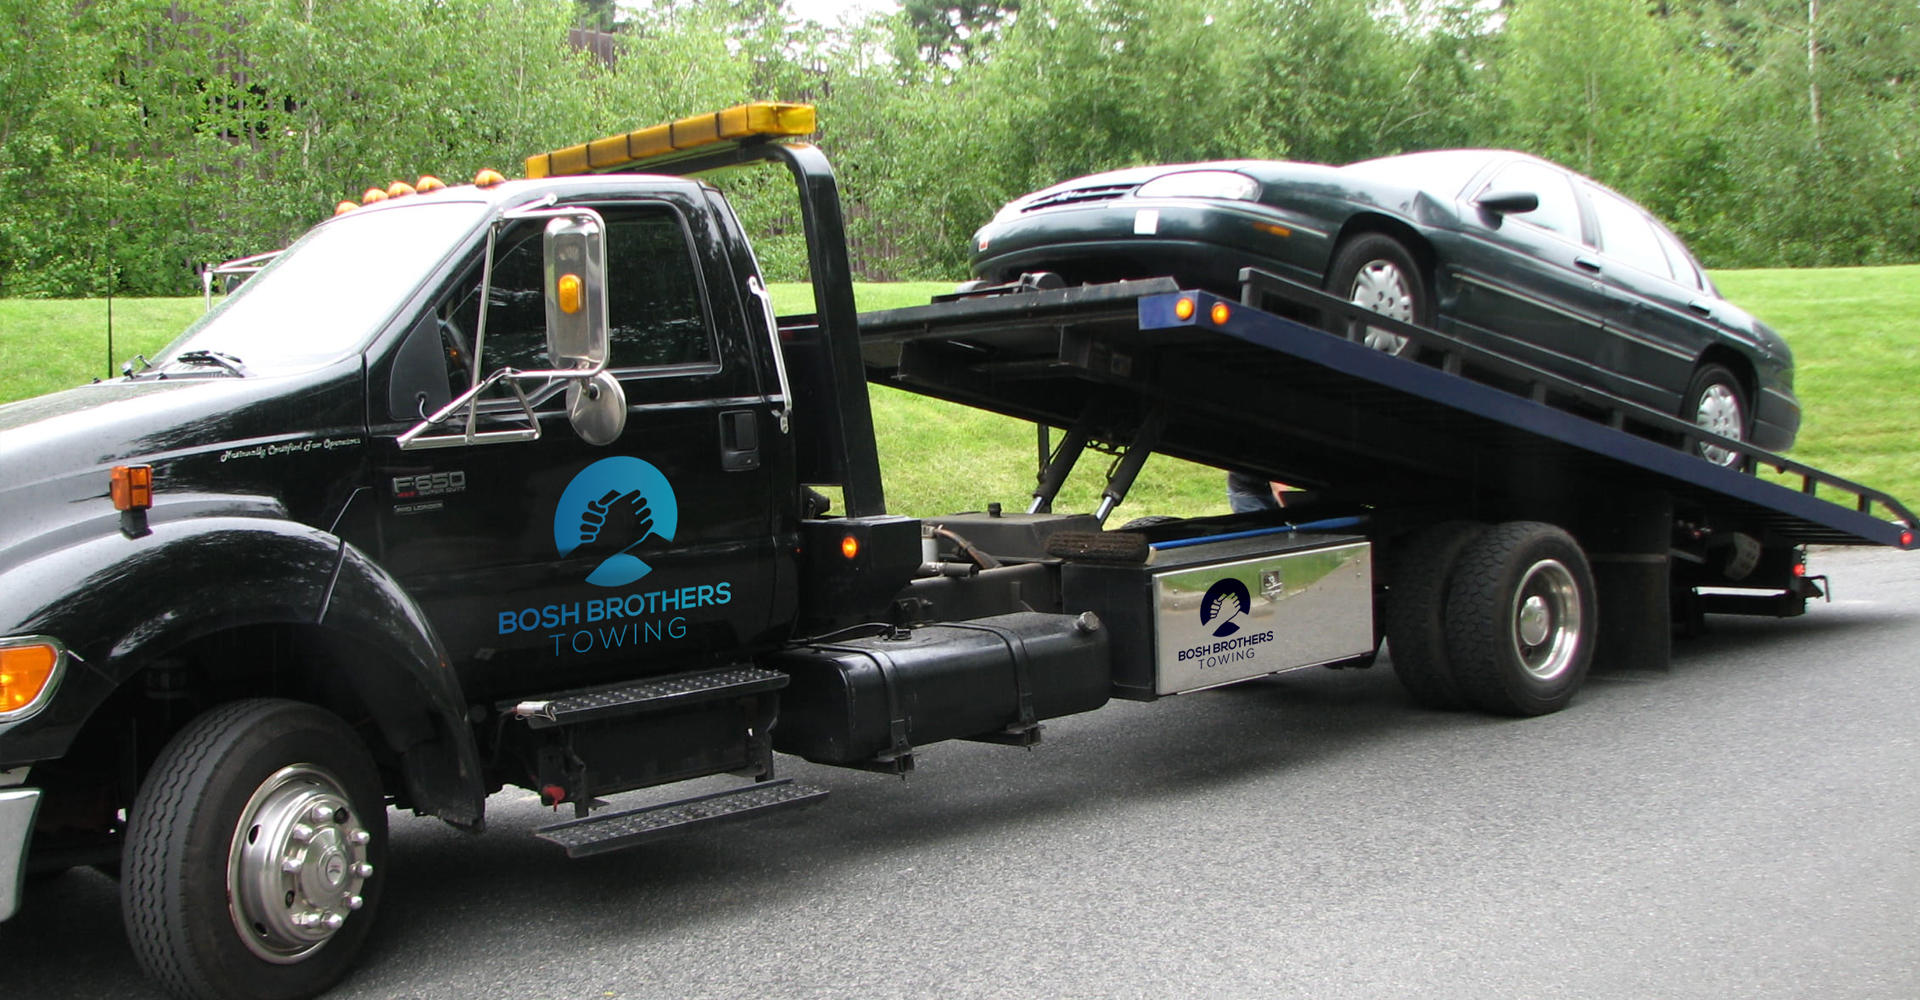 Bosh Brothers Towing